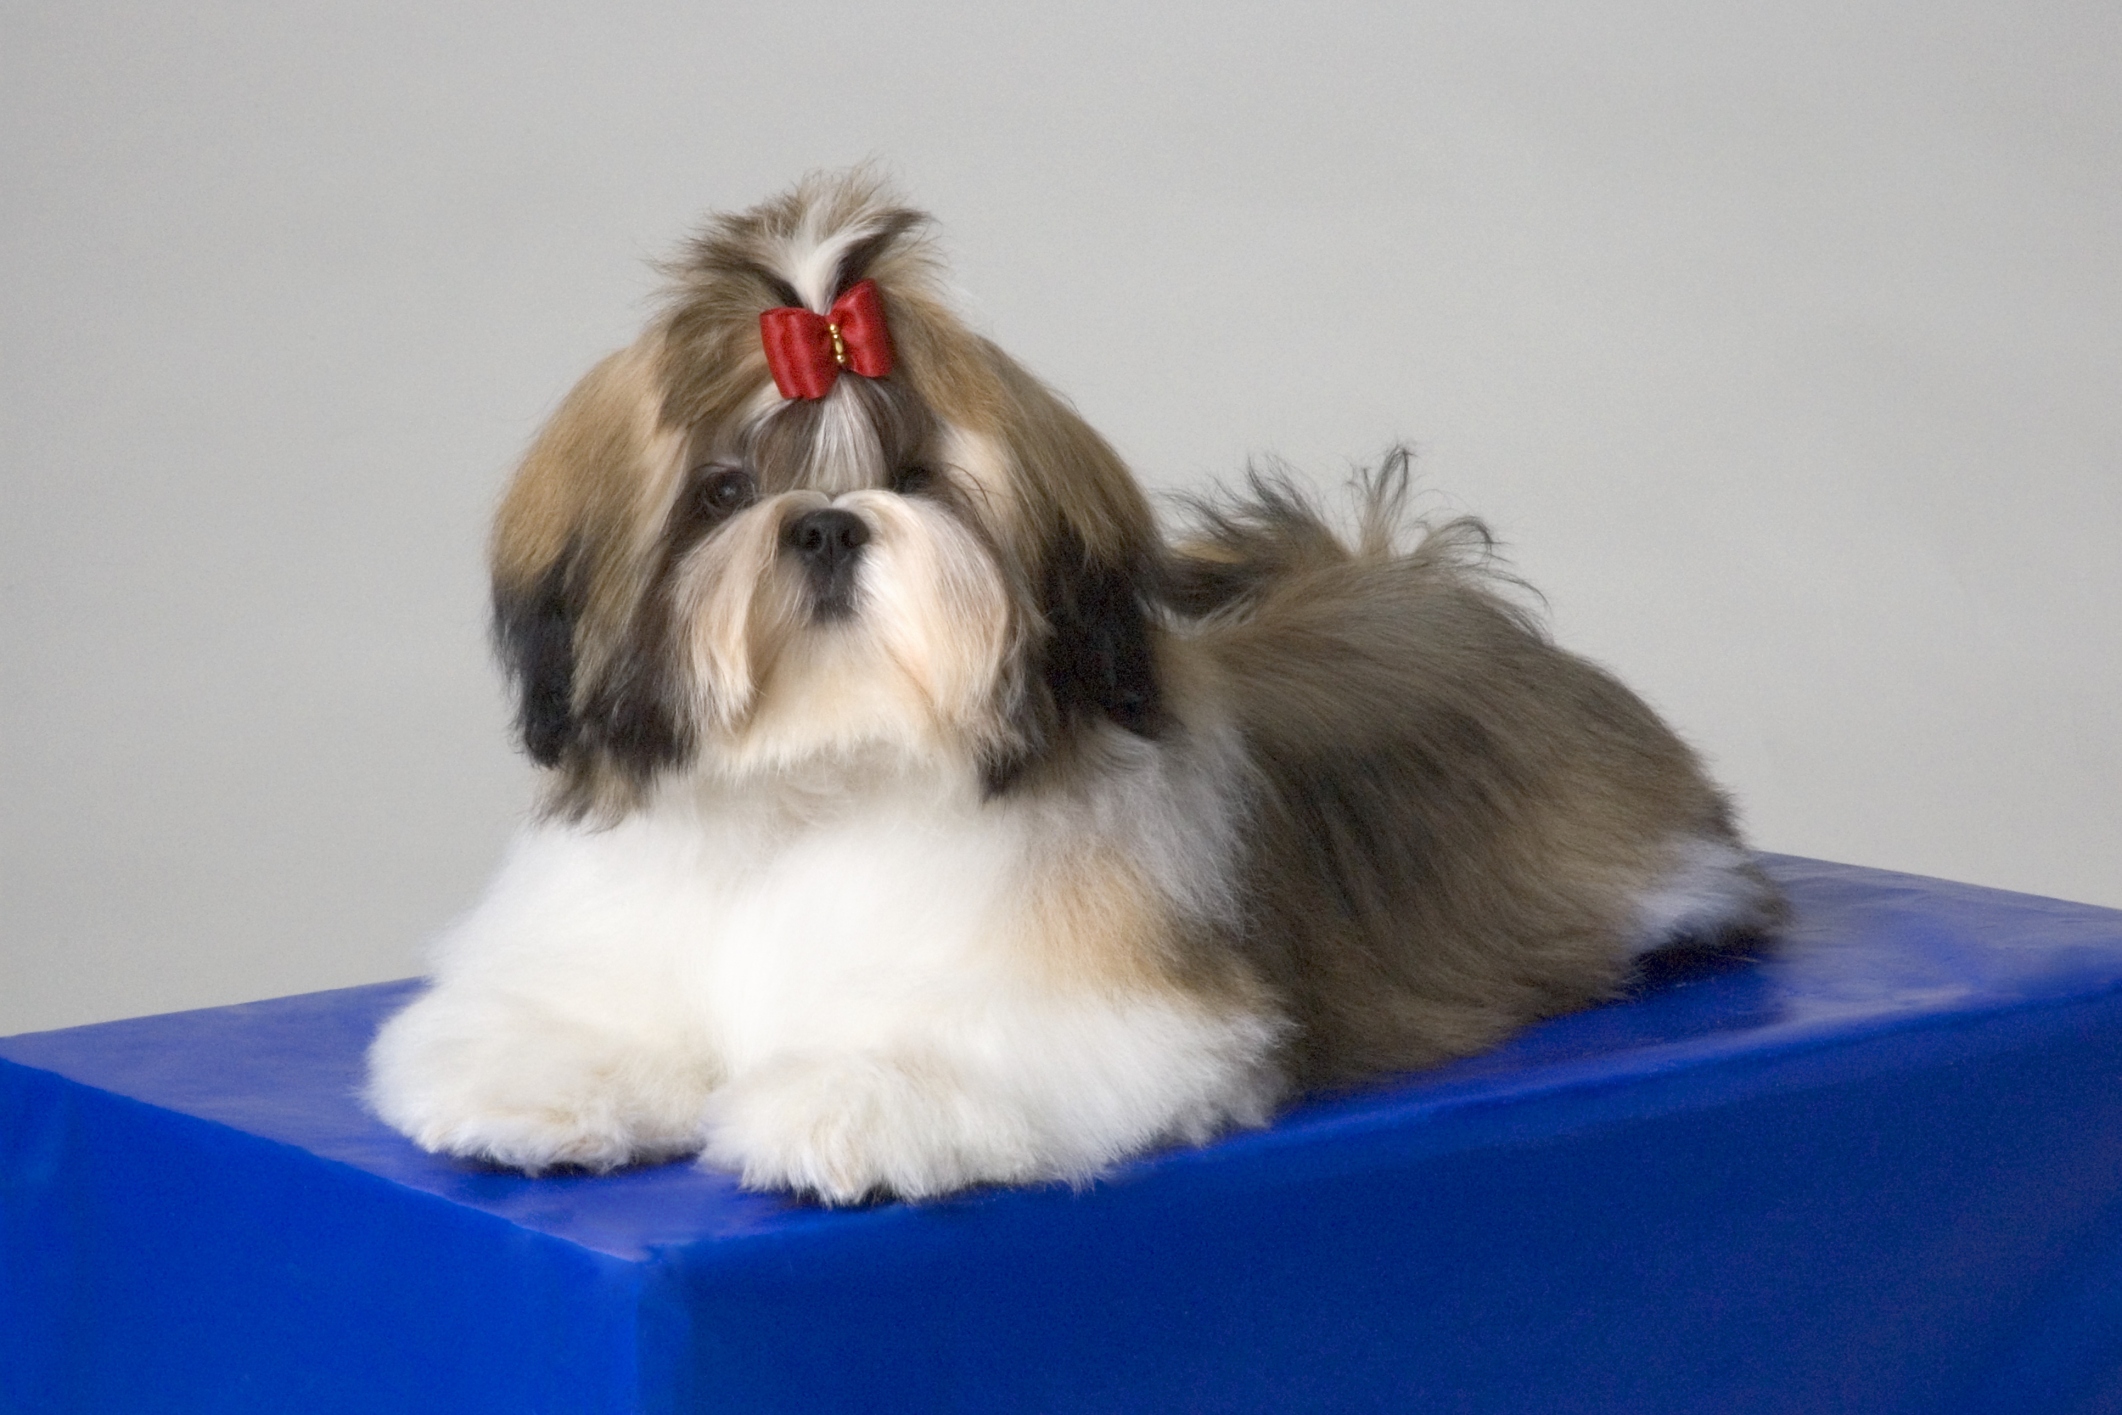 610 Shih Tzu Hair Styles Stock Photos Pictures  RoyaltyFree Images   iStock